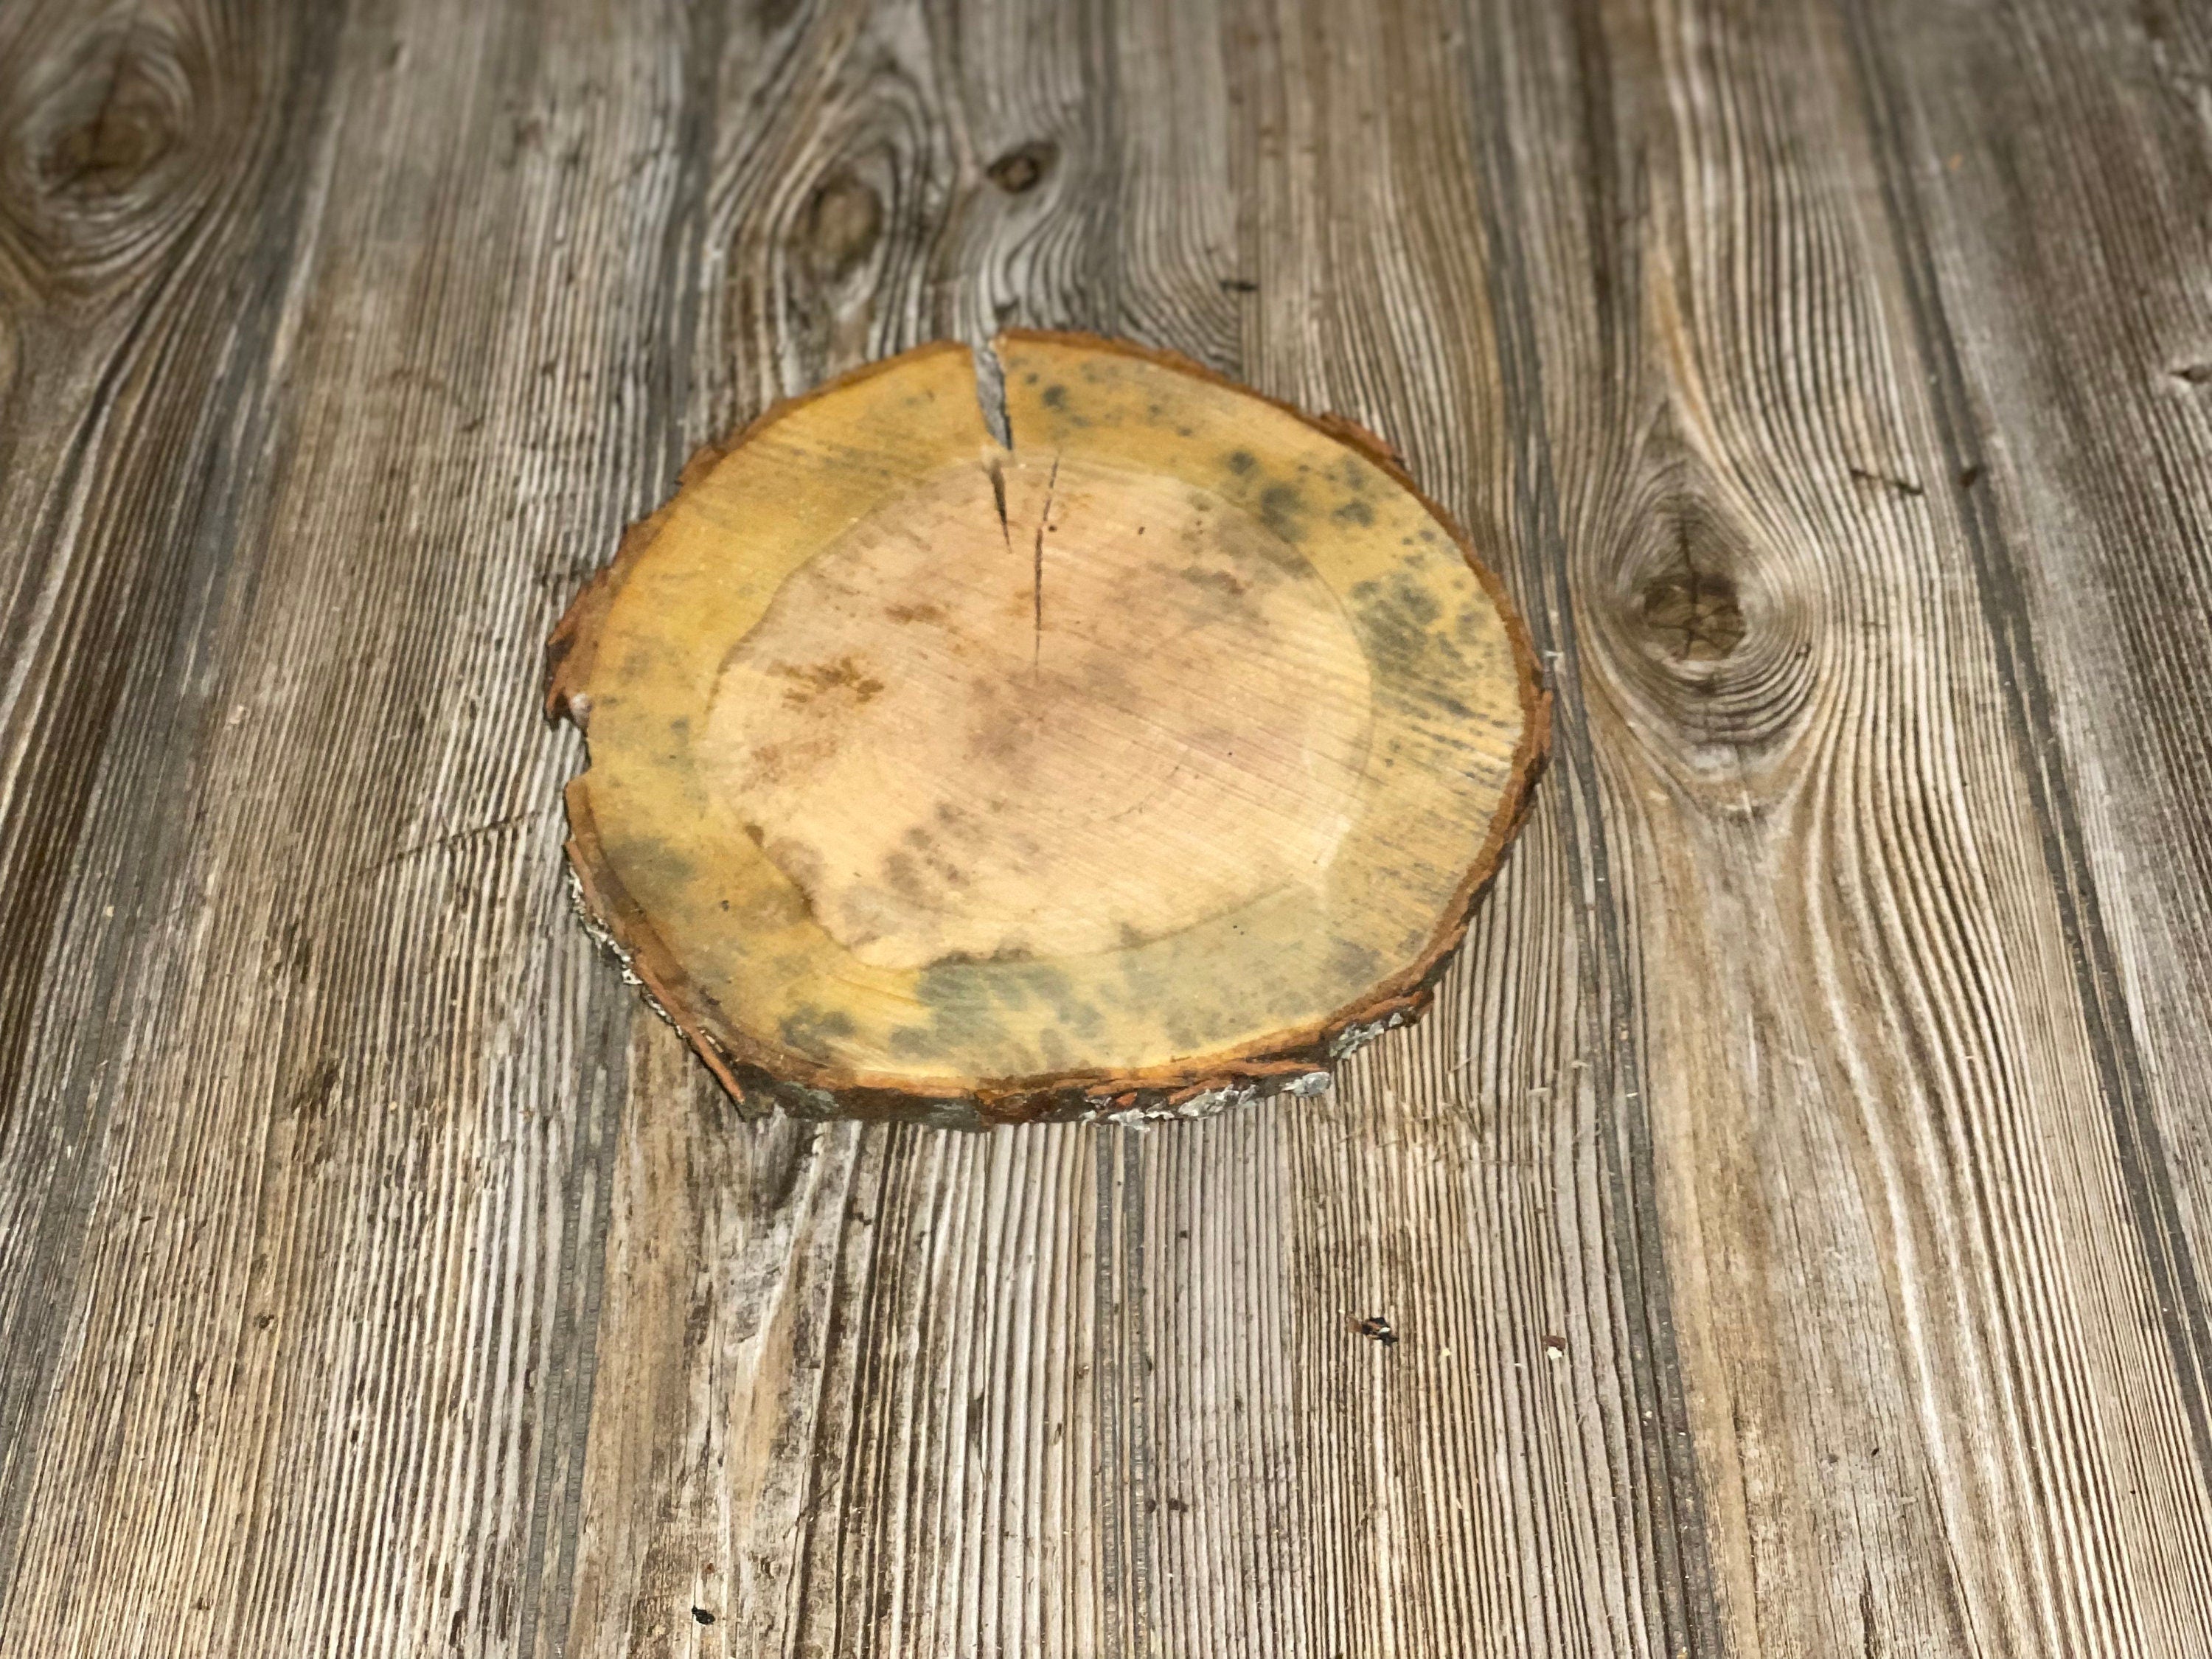 One Cracked Cherry Burl Slice, Approximately 8.5 Inches Long by 8 Inches Wide and 3/4 Inch Thick